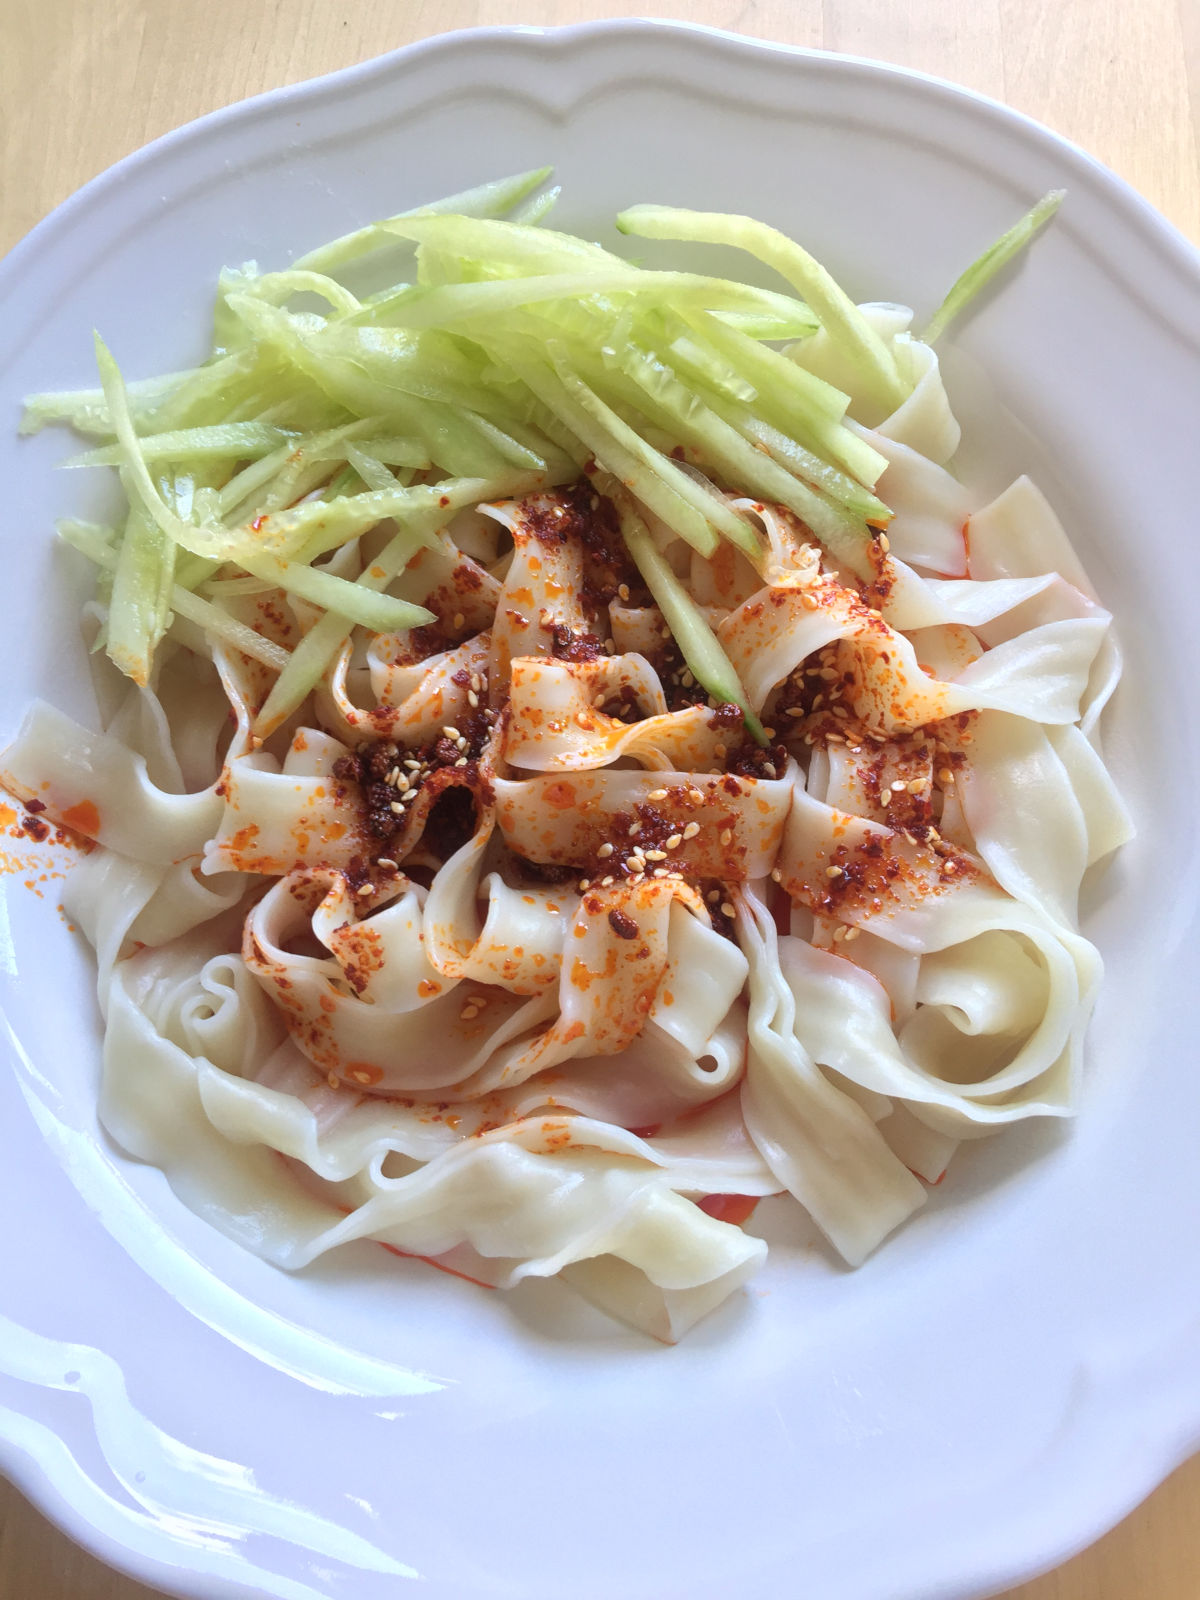 Overhead view of cooked noodles placed on a white plate with cucumber strips, chili oil and seasonings on top.